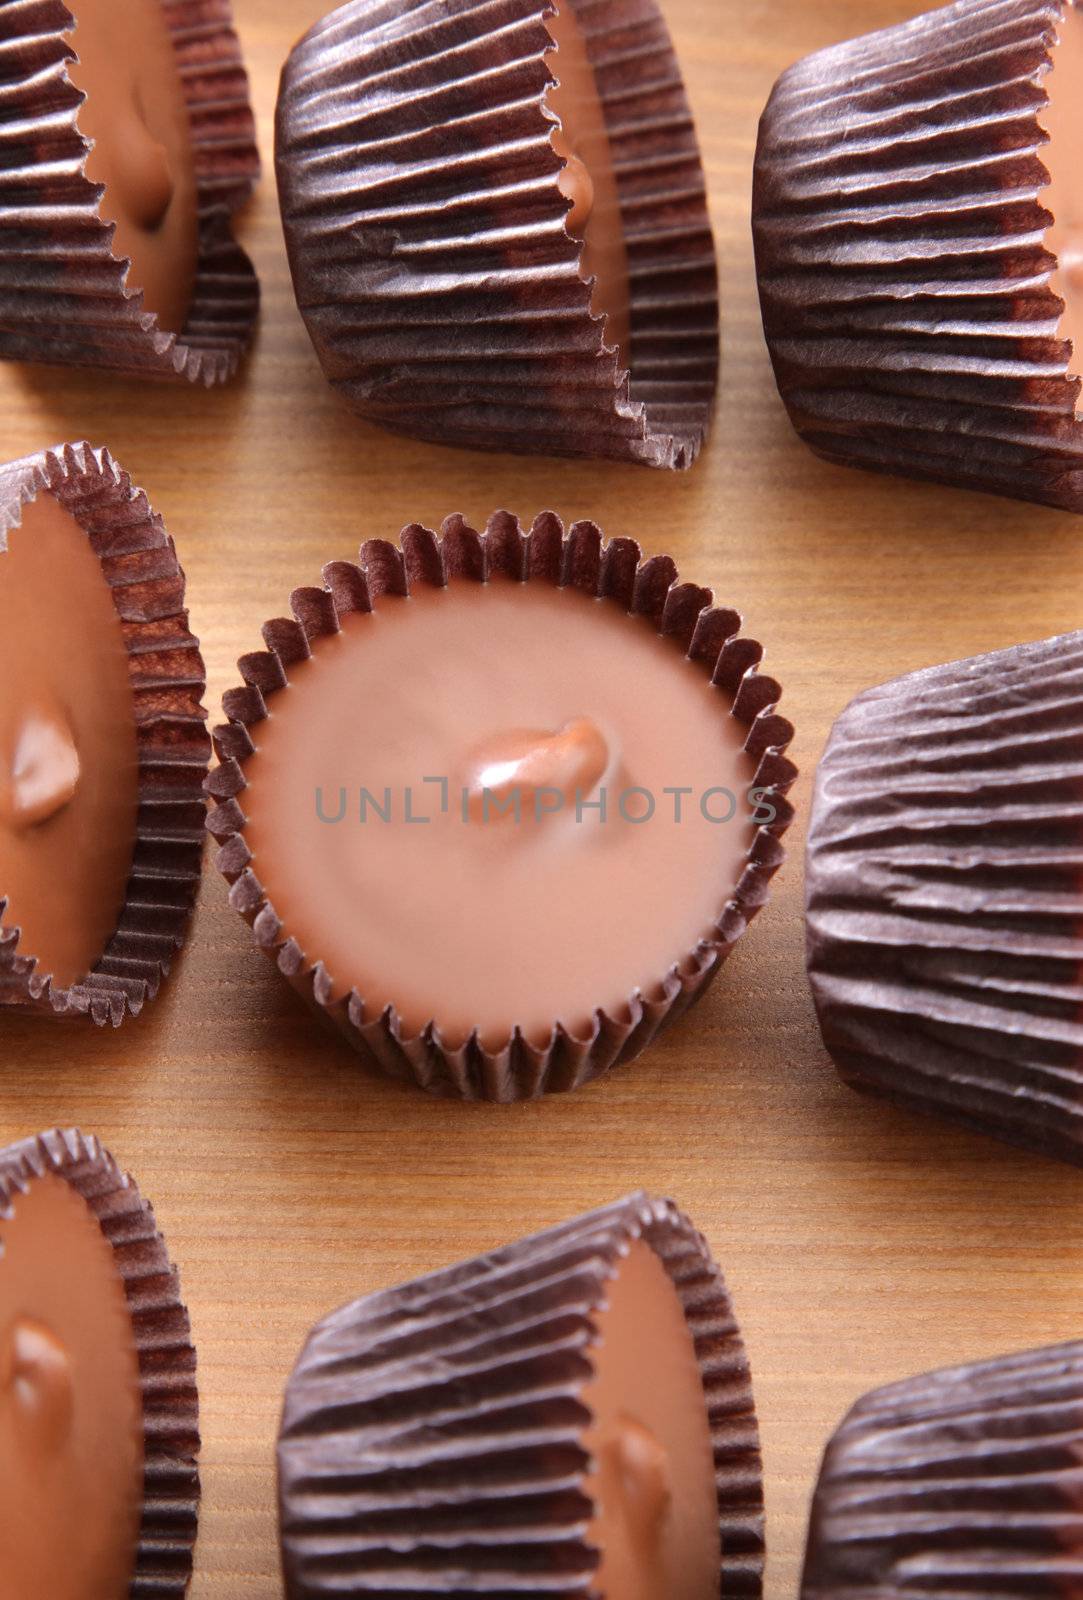 A group of peanut butter cups on a wood counter top.